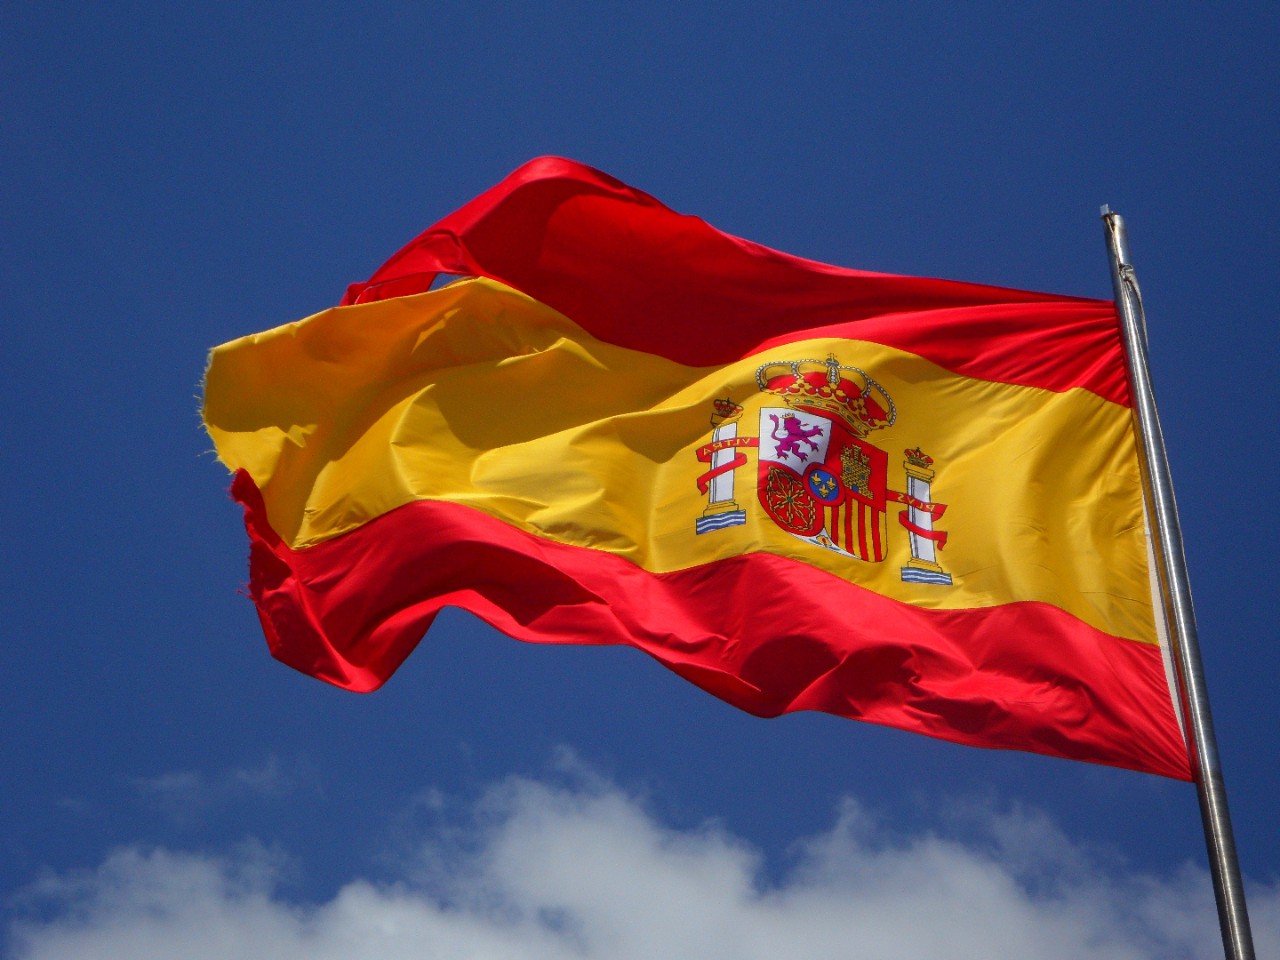 The Spanish flag flies in the wind.